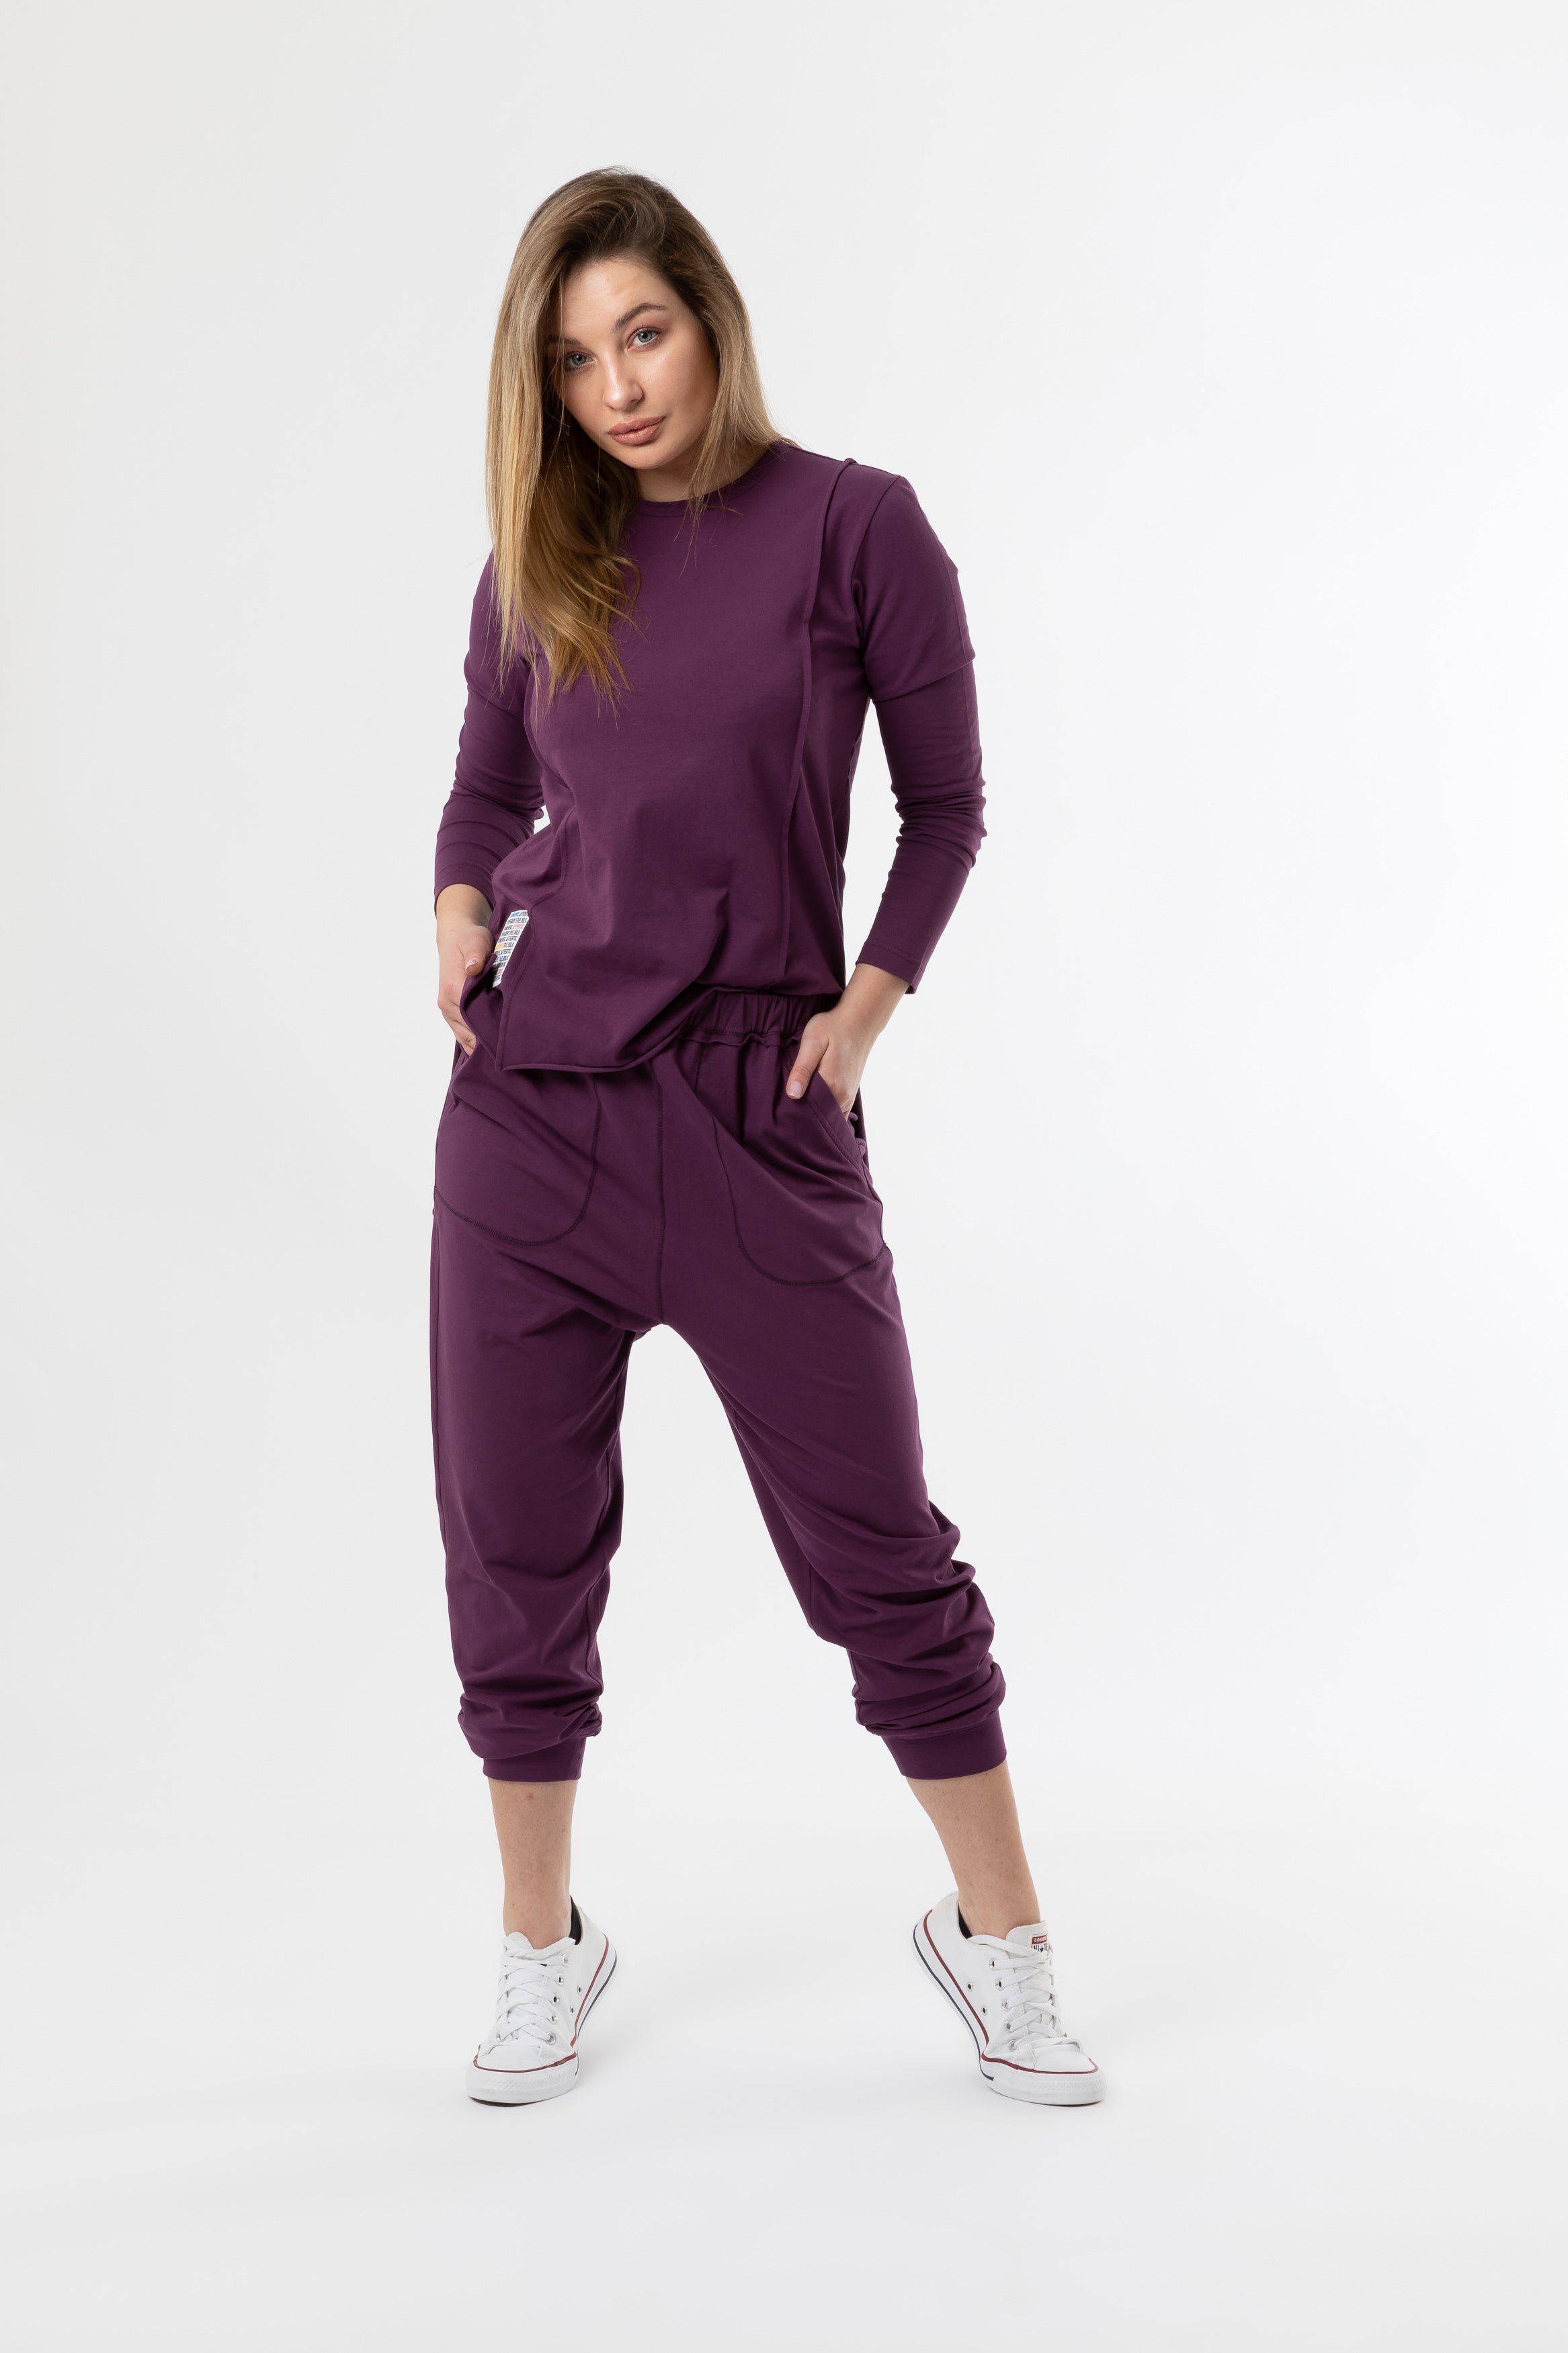 Stitches Low Crotch Jogger In Purple